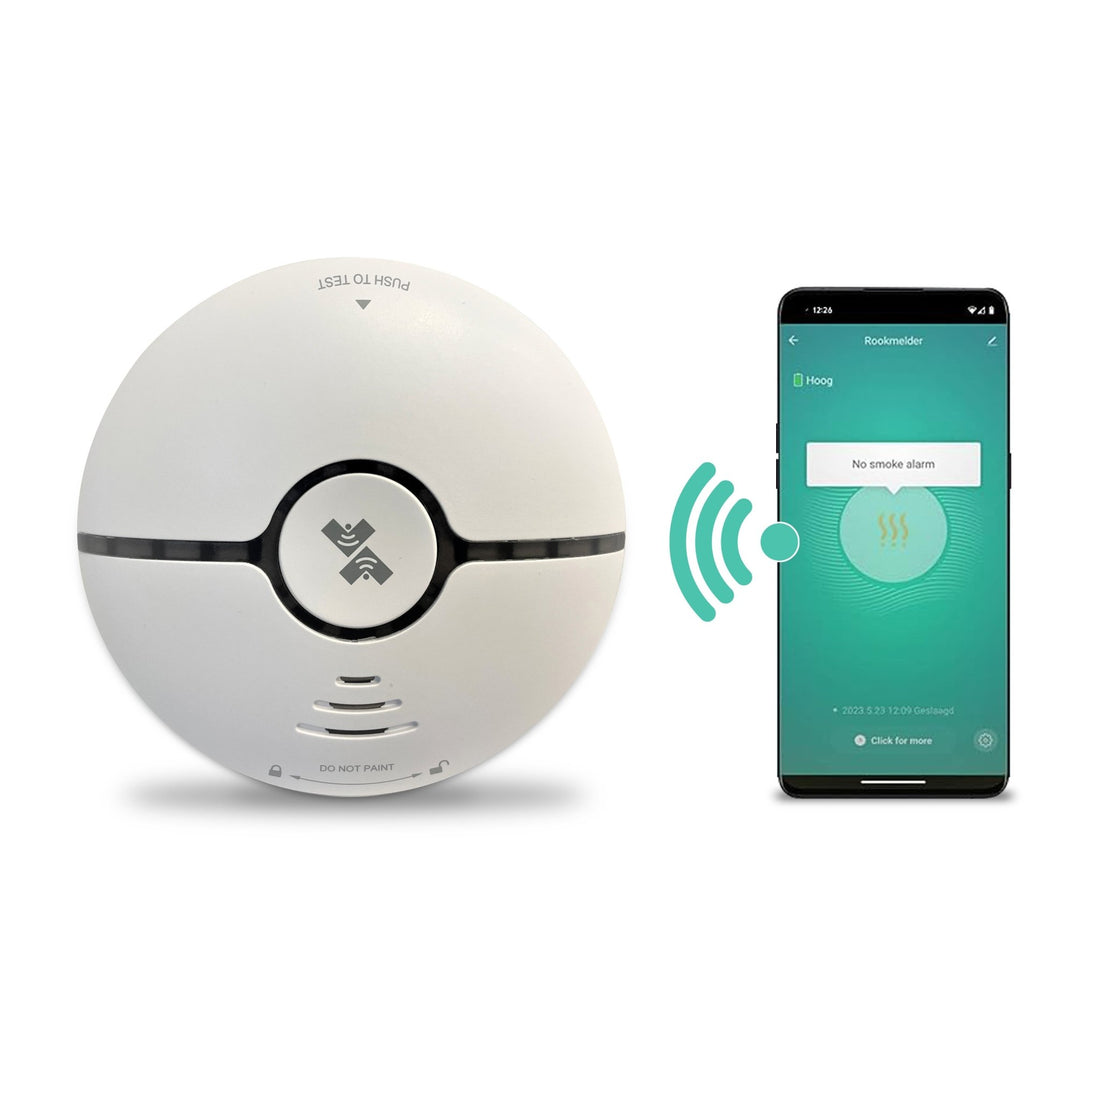 UK Technology Smart Smoke Alarm and phone showing app connectivity